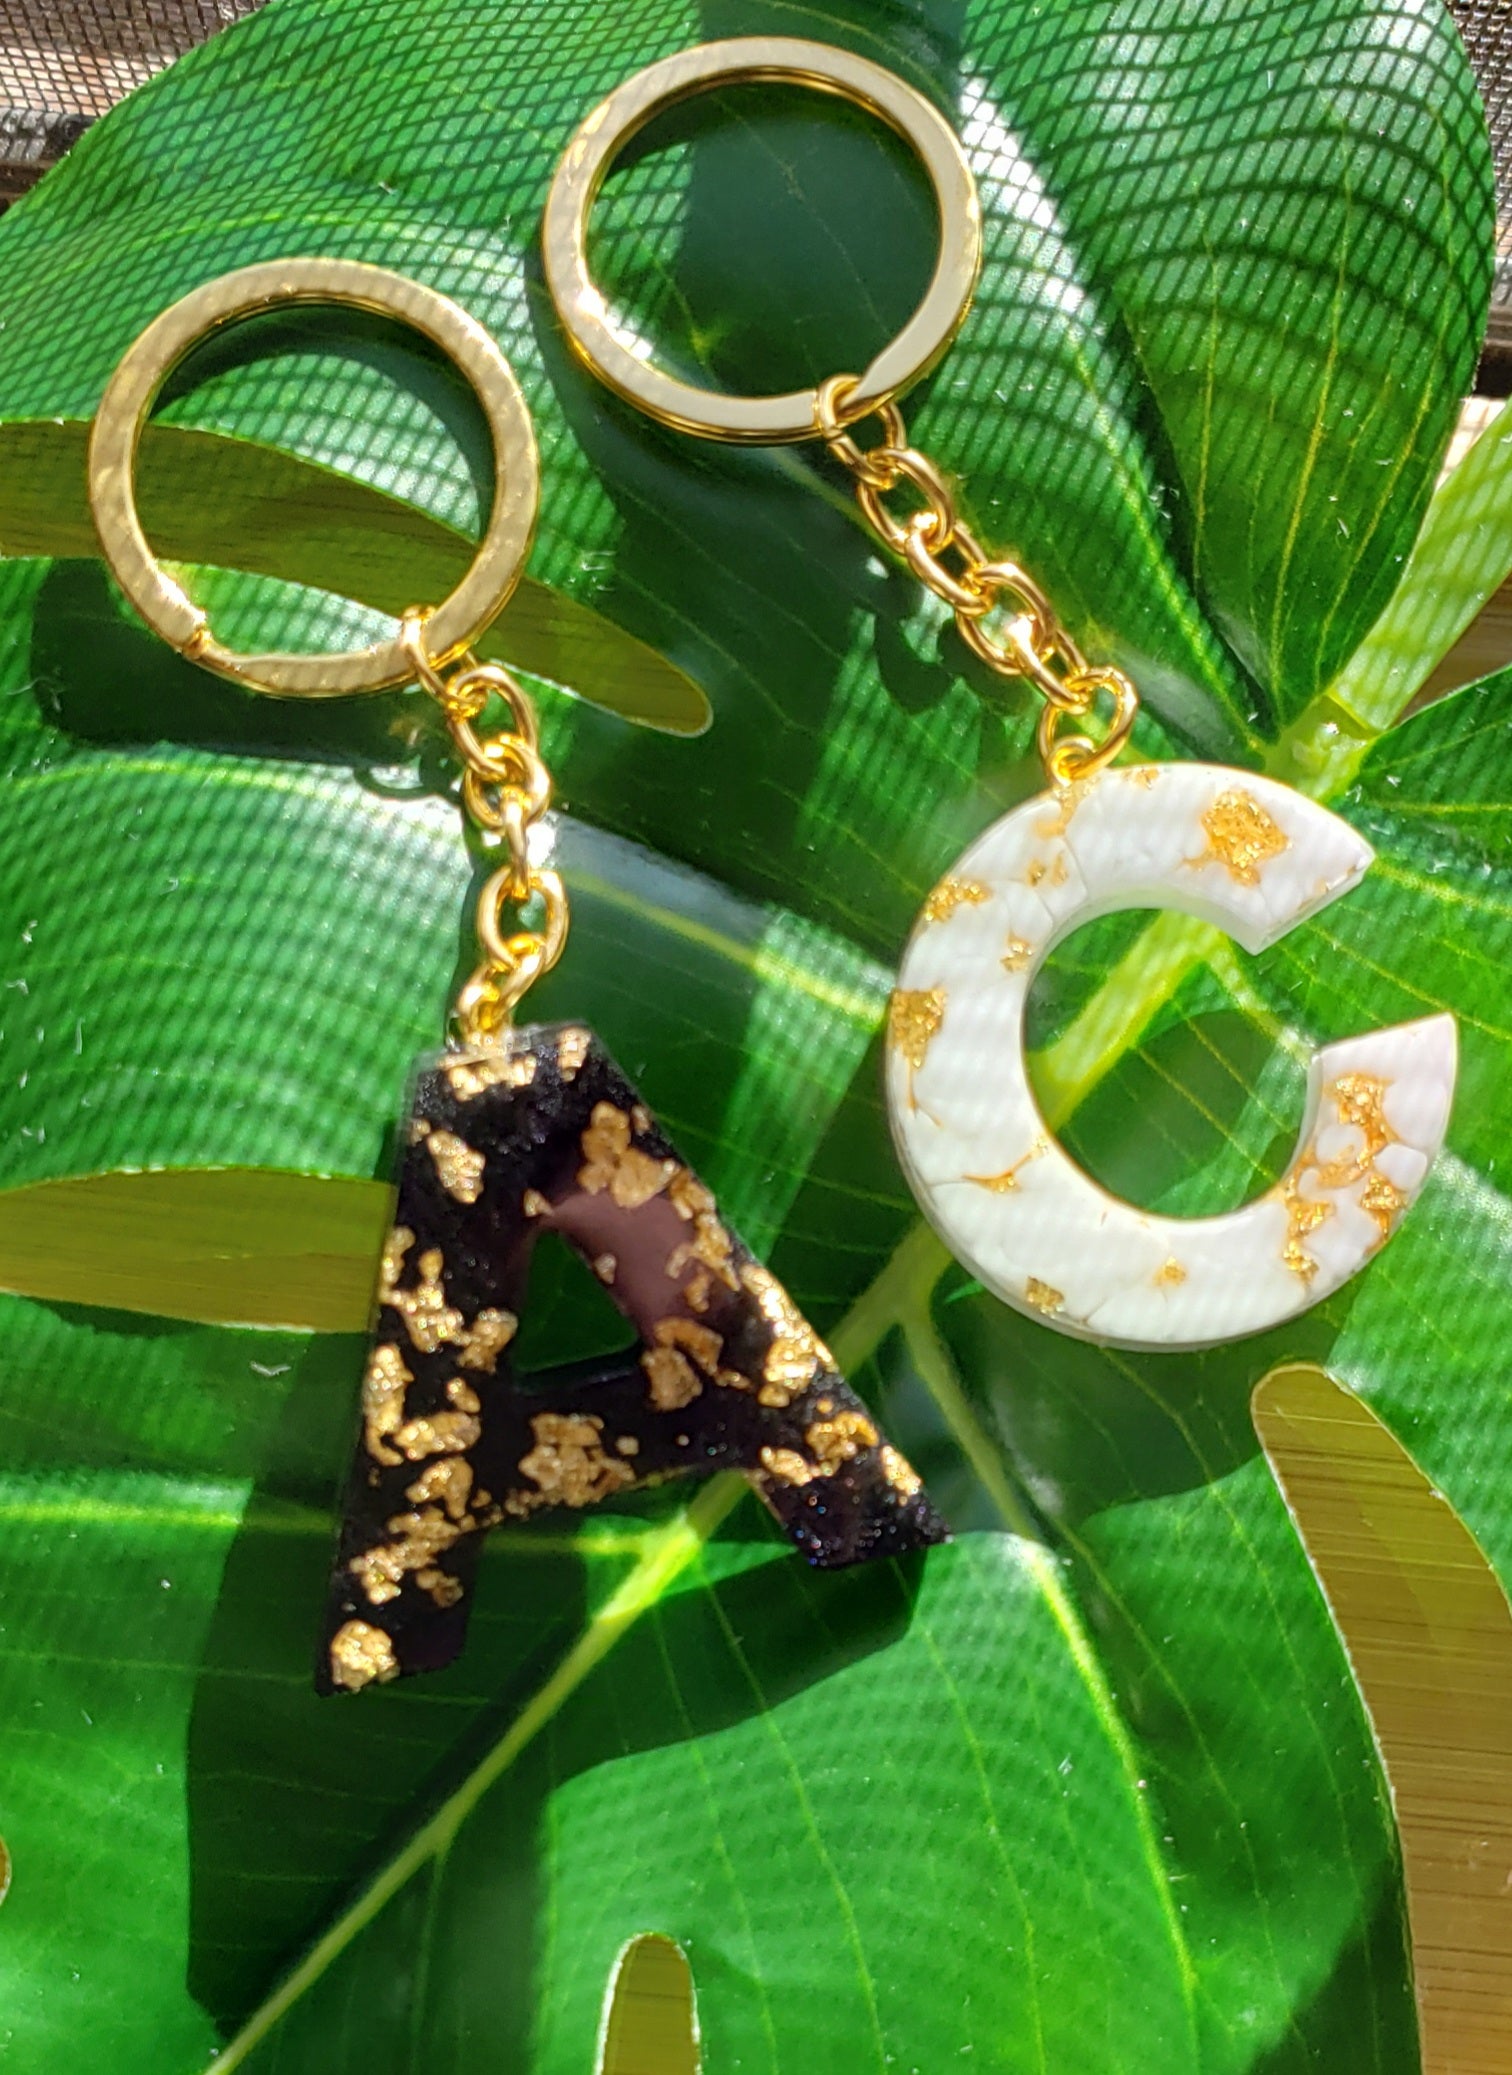 Custom Resin Initial Letter Keychains Gold Flakes Made to 